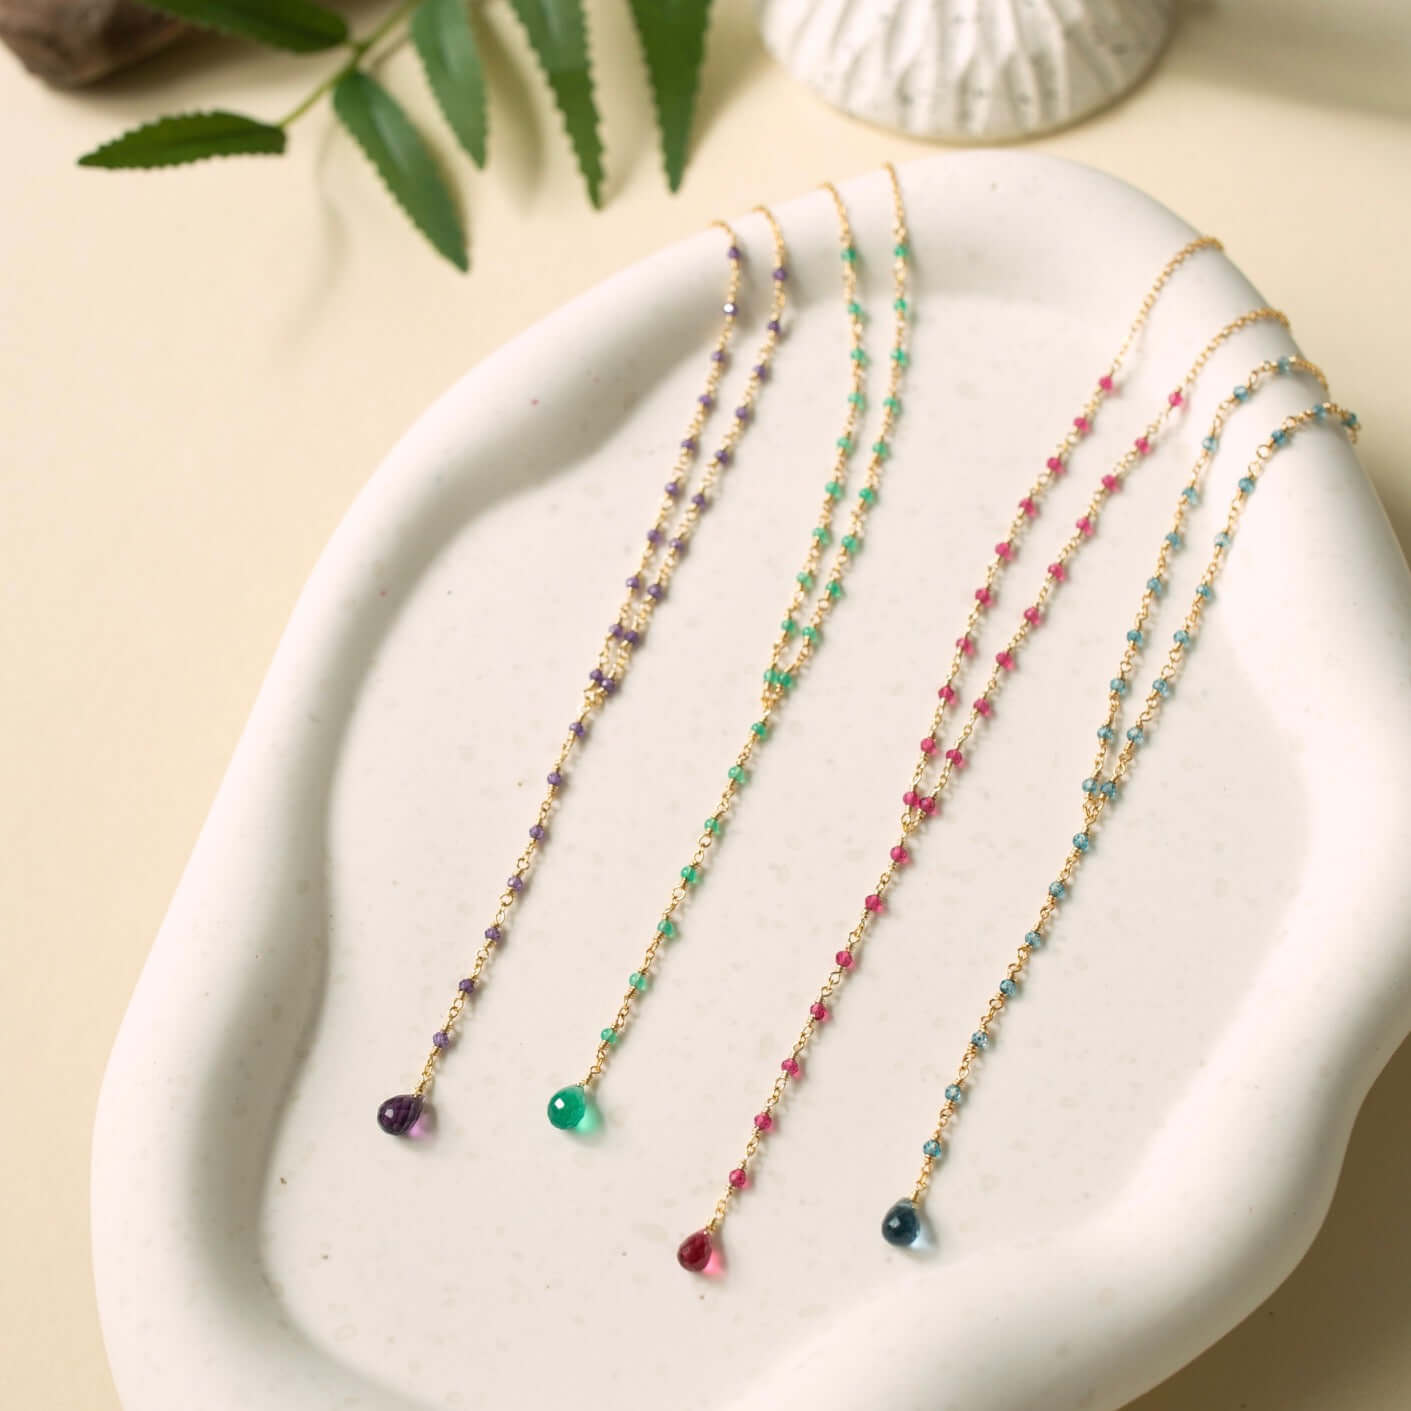 Elegant gemstone necklace collection with pink tourmaline quartz, green onyx, and lolite